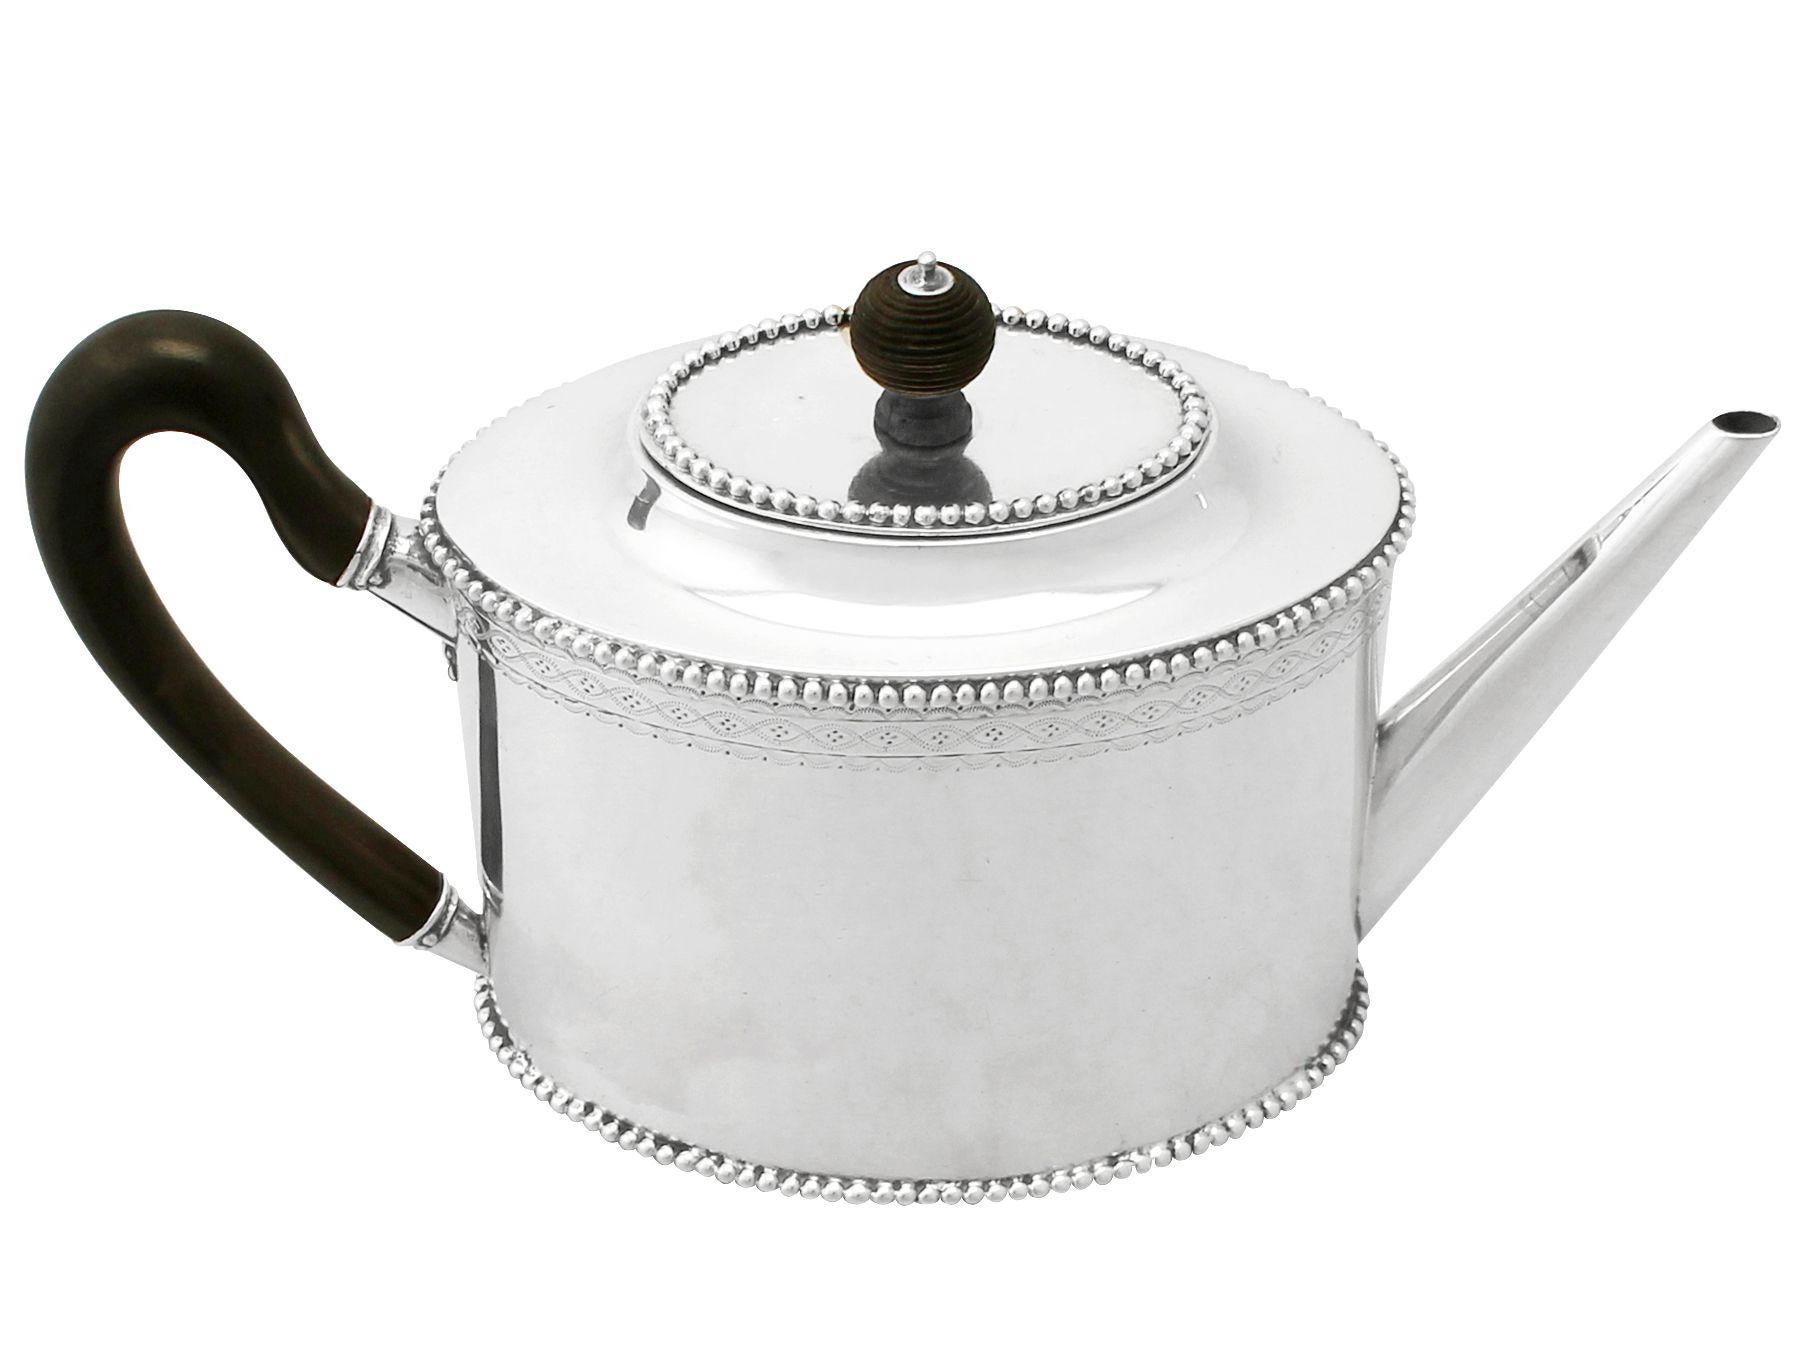 An exceptional, fine and impressive antique Dutch silver teapot, an addition to our silver teaware collection.

This exceptional antique Dutch silver teapot has an oval can shaped form.

The surface of this Dutch teapot is plain and encompassed